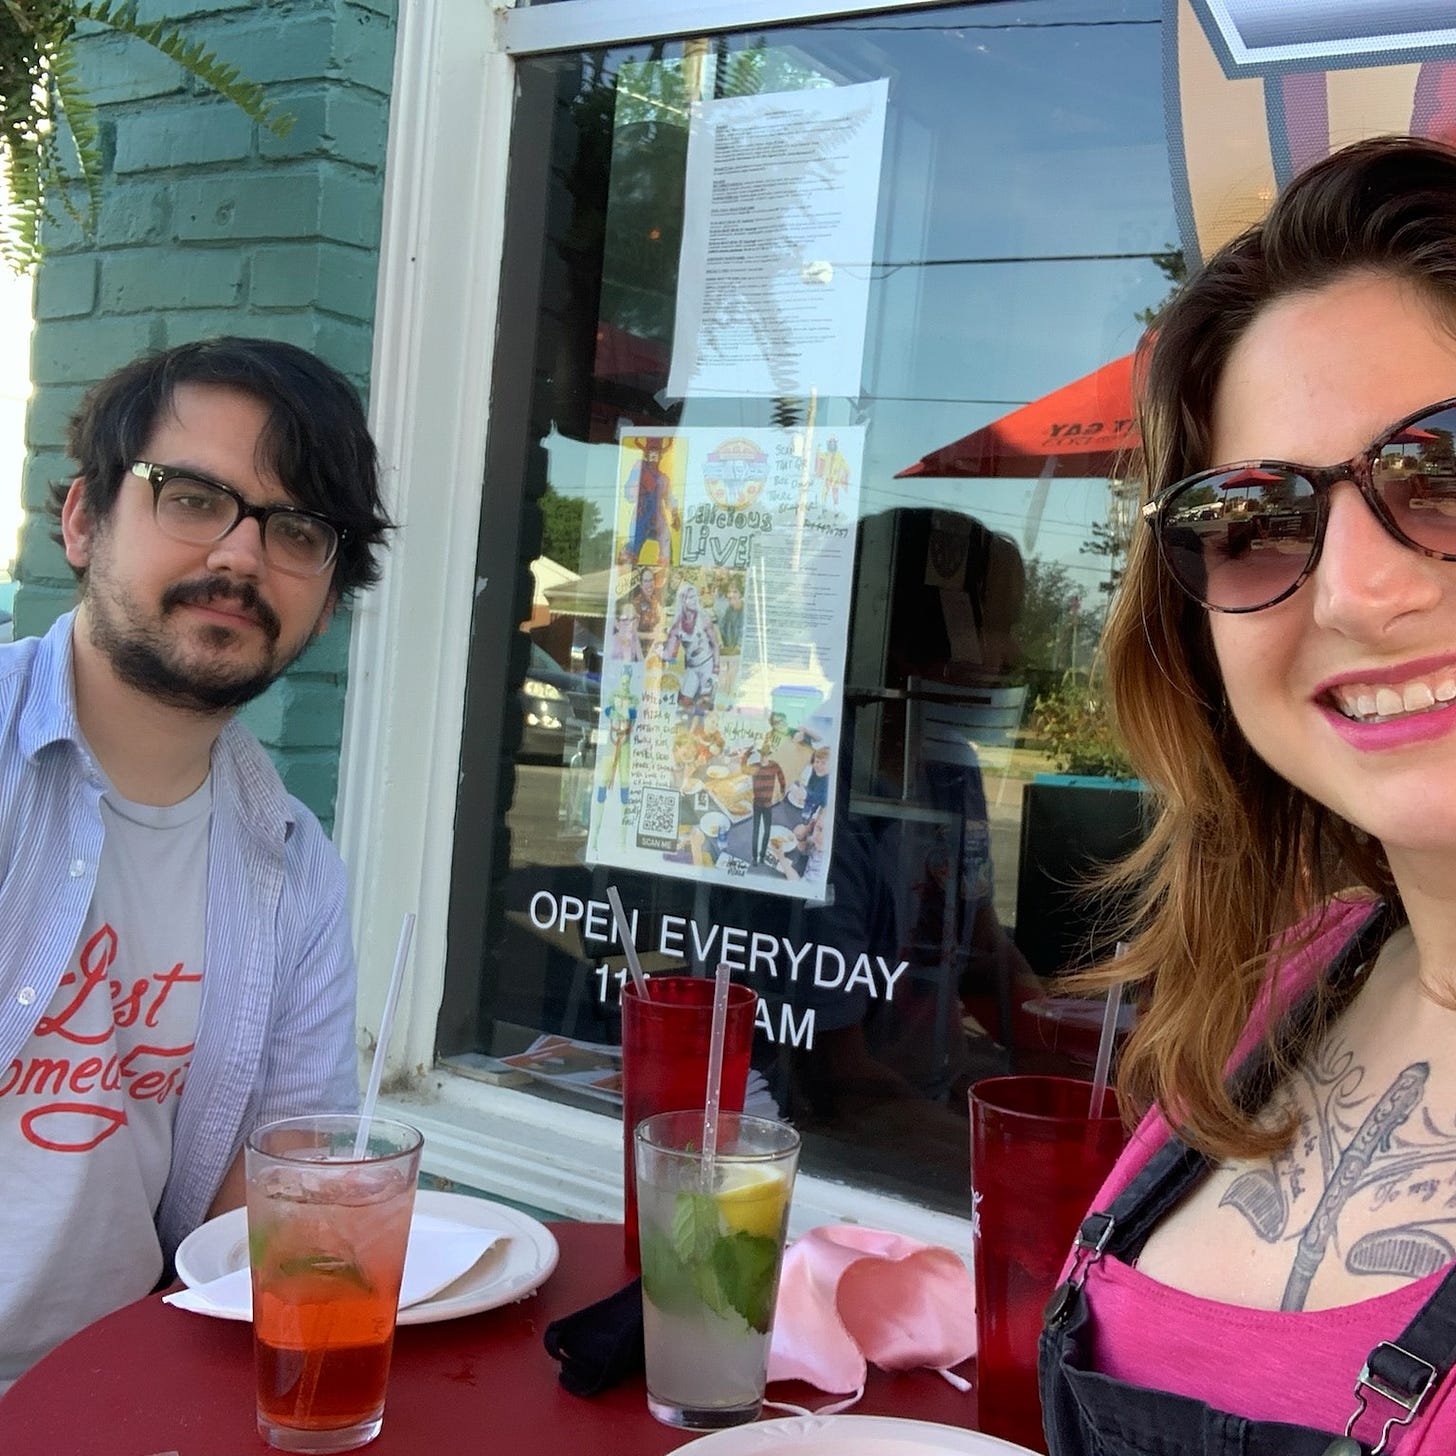 my partner, ty, and i with drinks in front of a local restaurant (it's hot for pizza, one of my fave pizza places in richmond) 